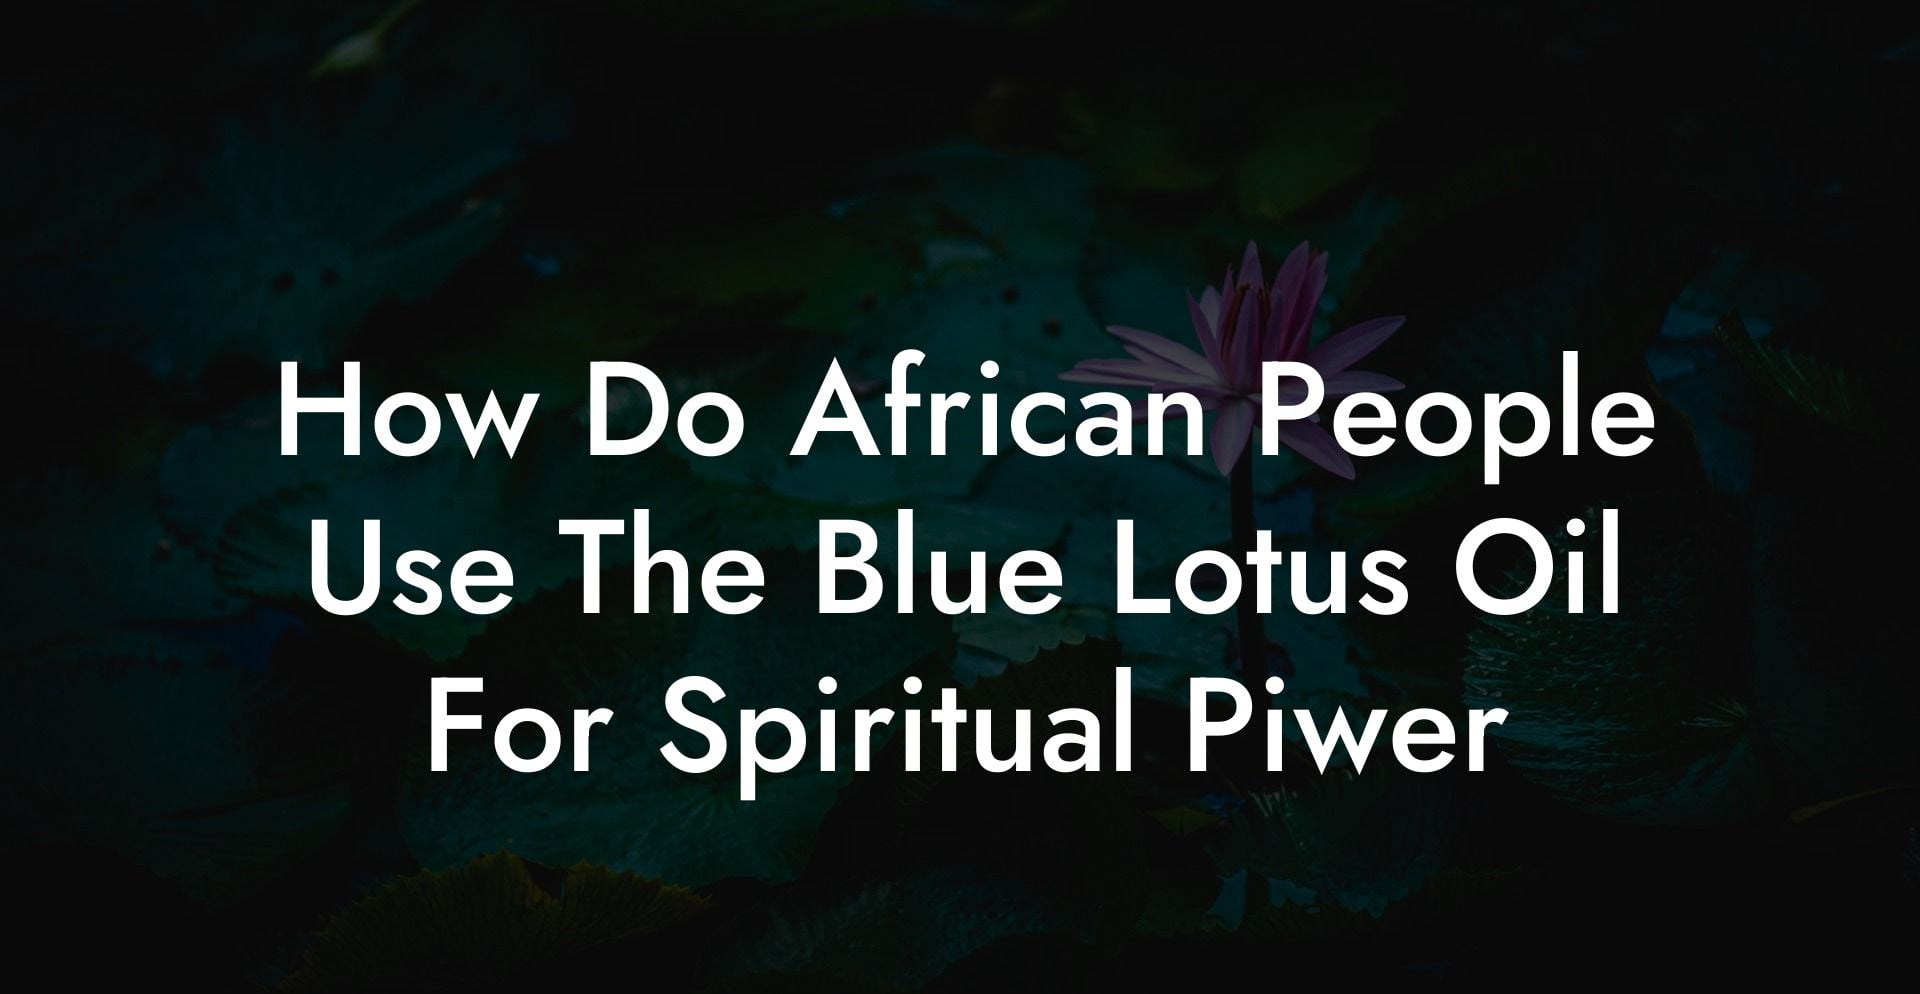 How Do African People Use The Blue Lotus Oil For Spiritual Piwer